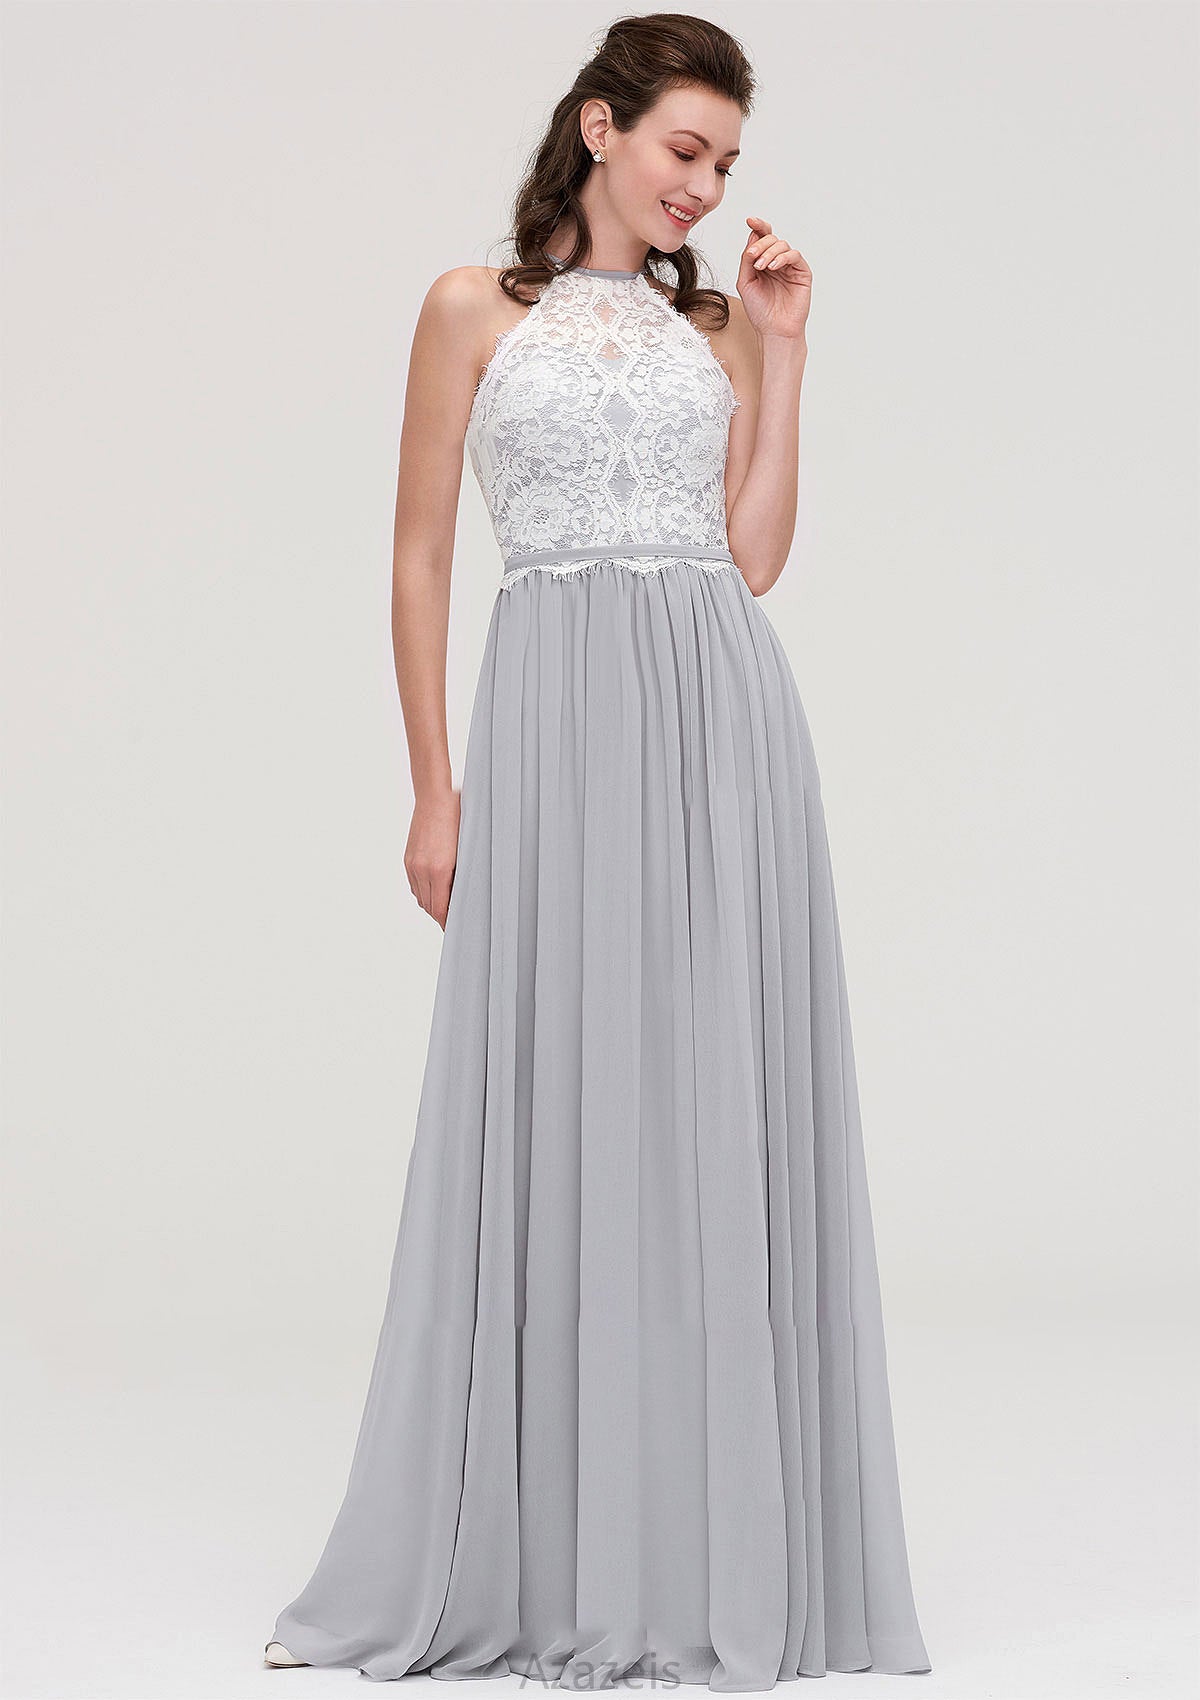 Sleeveless Scoop Neck A-line/Princess Chiffon Long/Floor-Length Bridesmaid Dresseses With Lace Avah DFP0025497